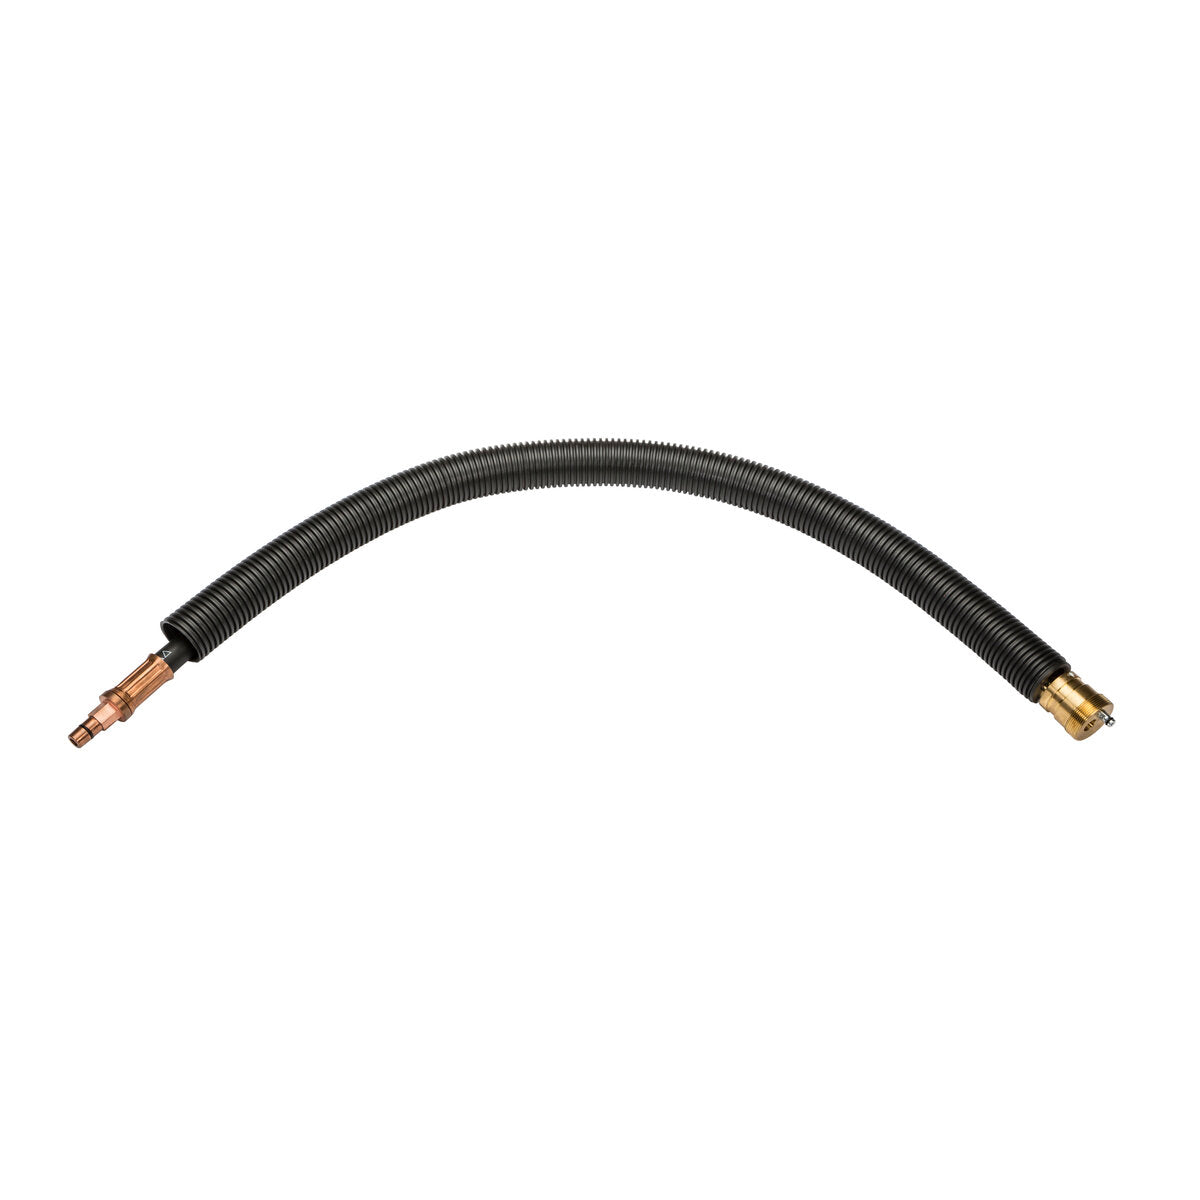 Lincoln Electric - AutoDrive® S Cable ABB 2600ID-8/2.0 - KP4305-2600ID-20